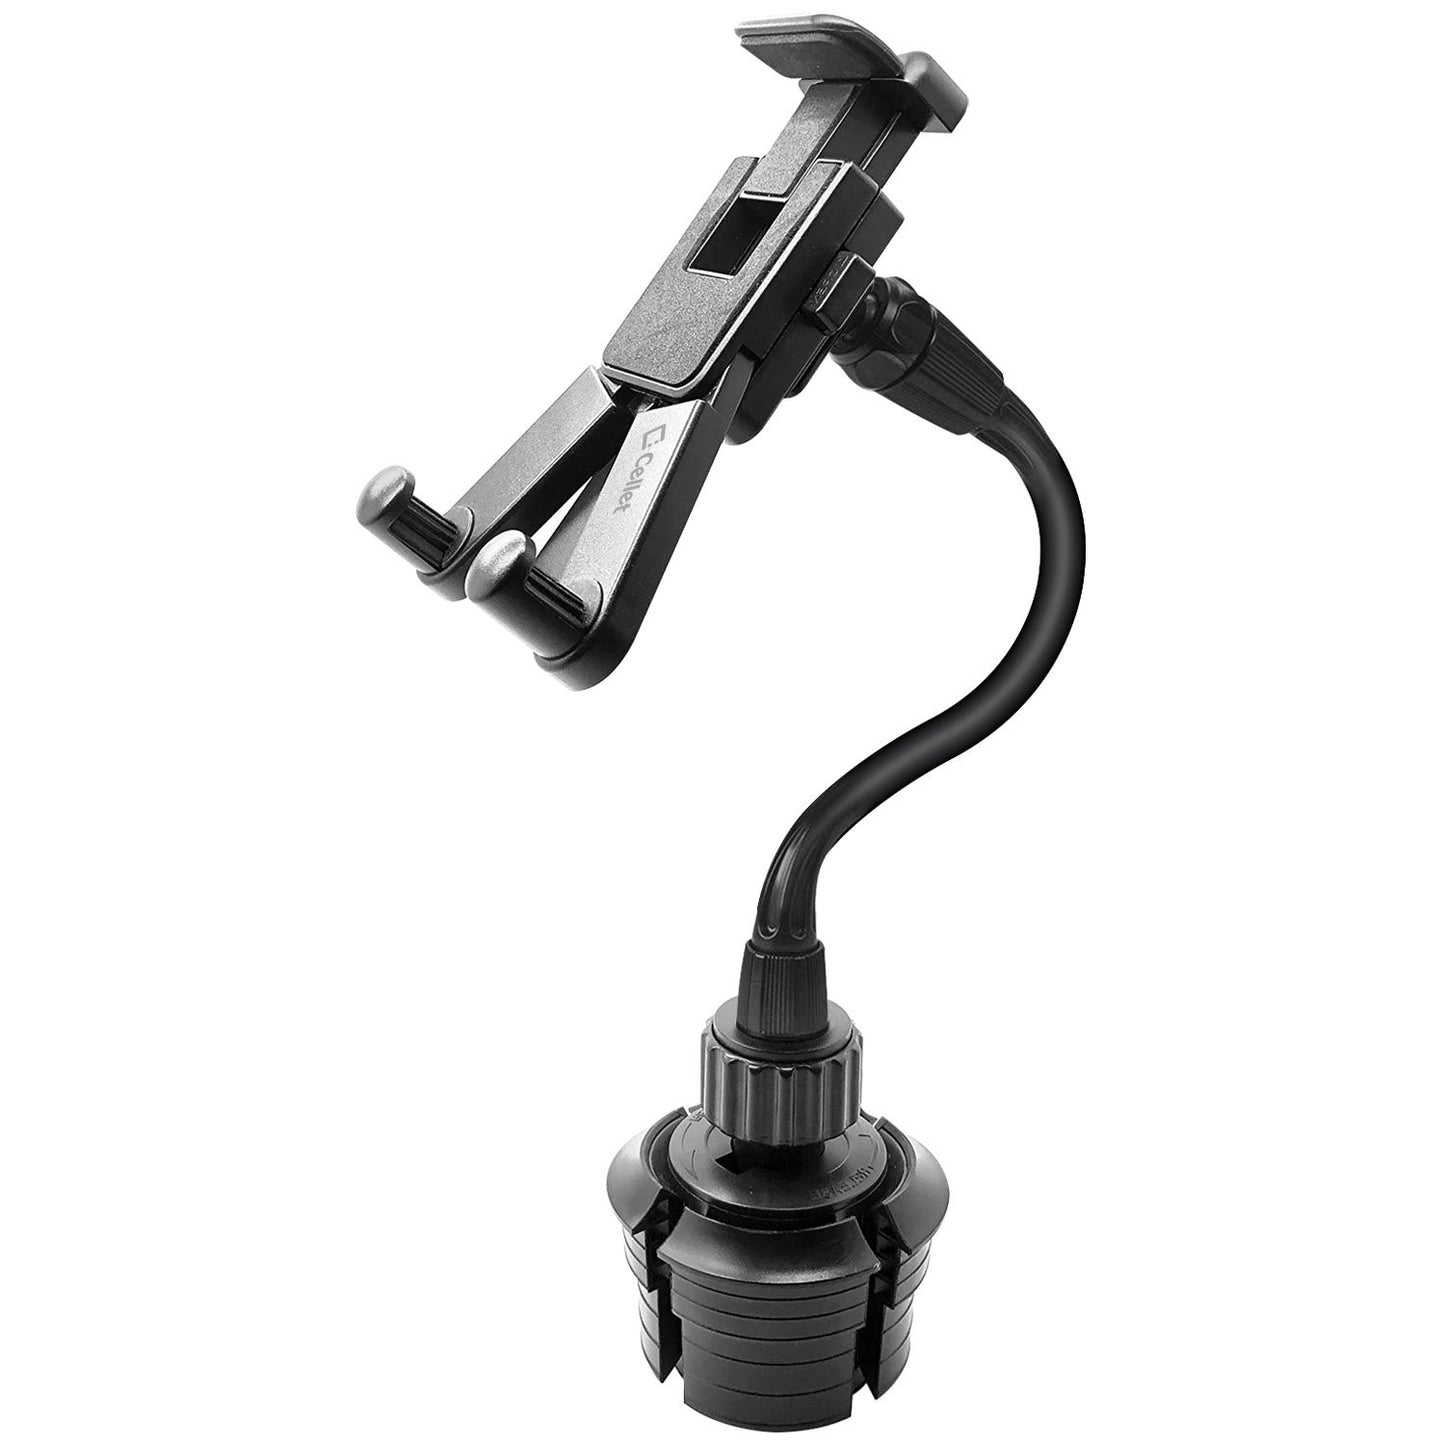 PH670G - Heavy Duty Tablet Mount, Cup Holder Mount with Flexible Gooseneck and 360 Degree Rotation for Tablets by Cellet